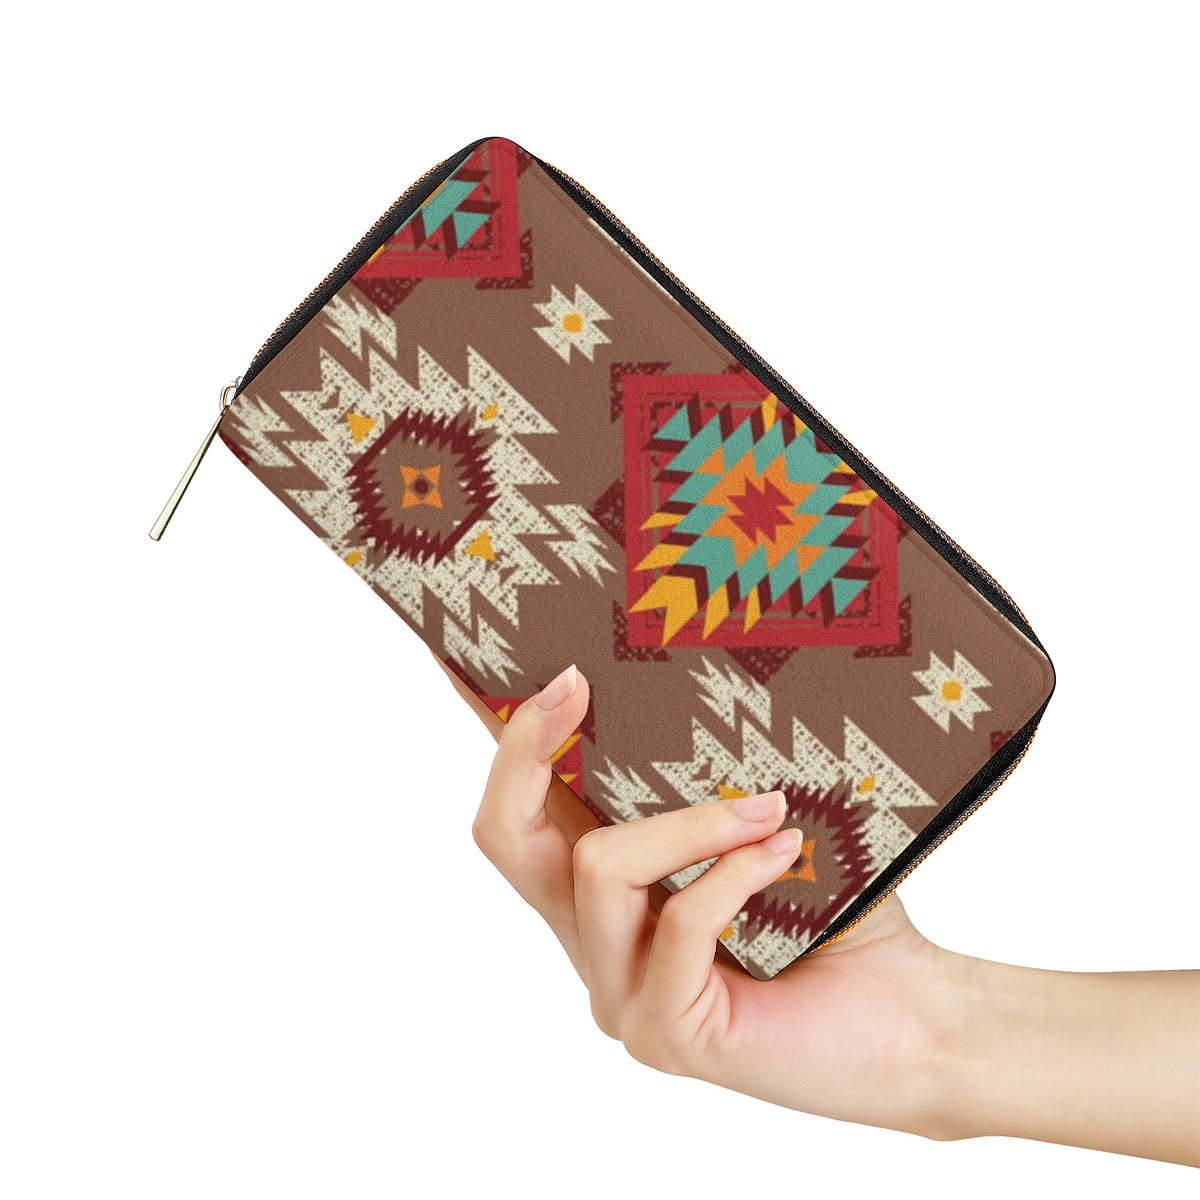 Brown red & Turquoise Aztec Wallet